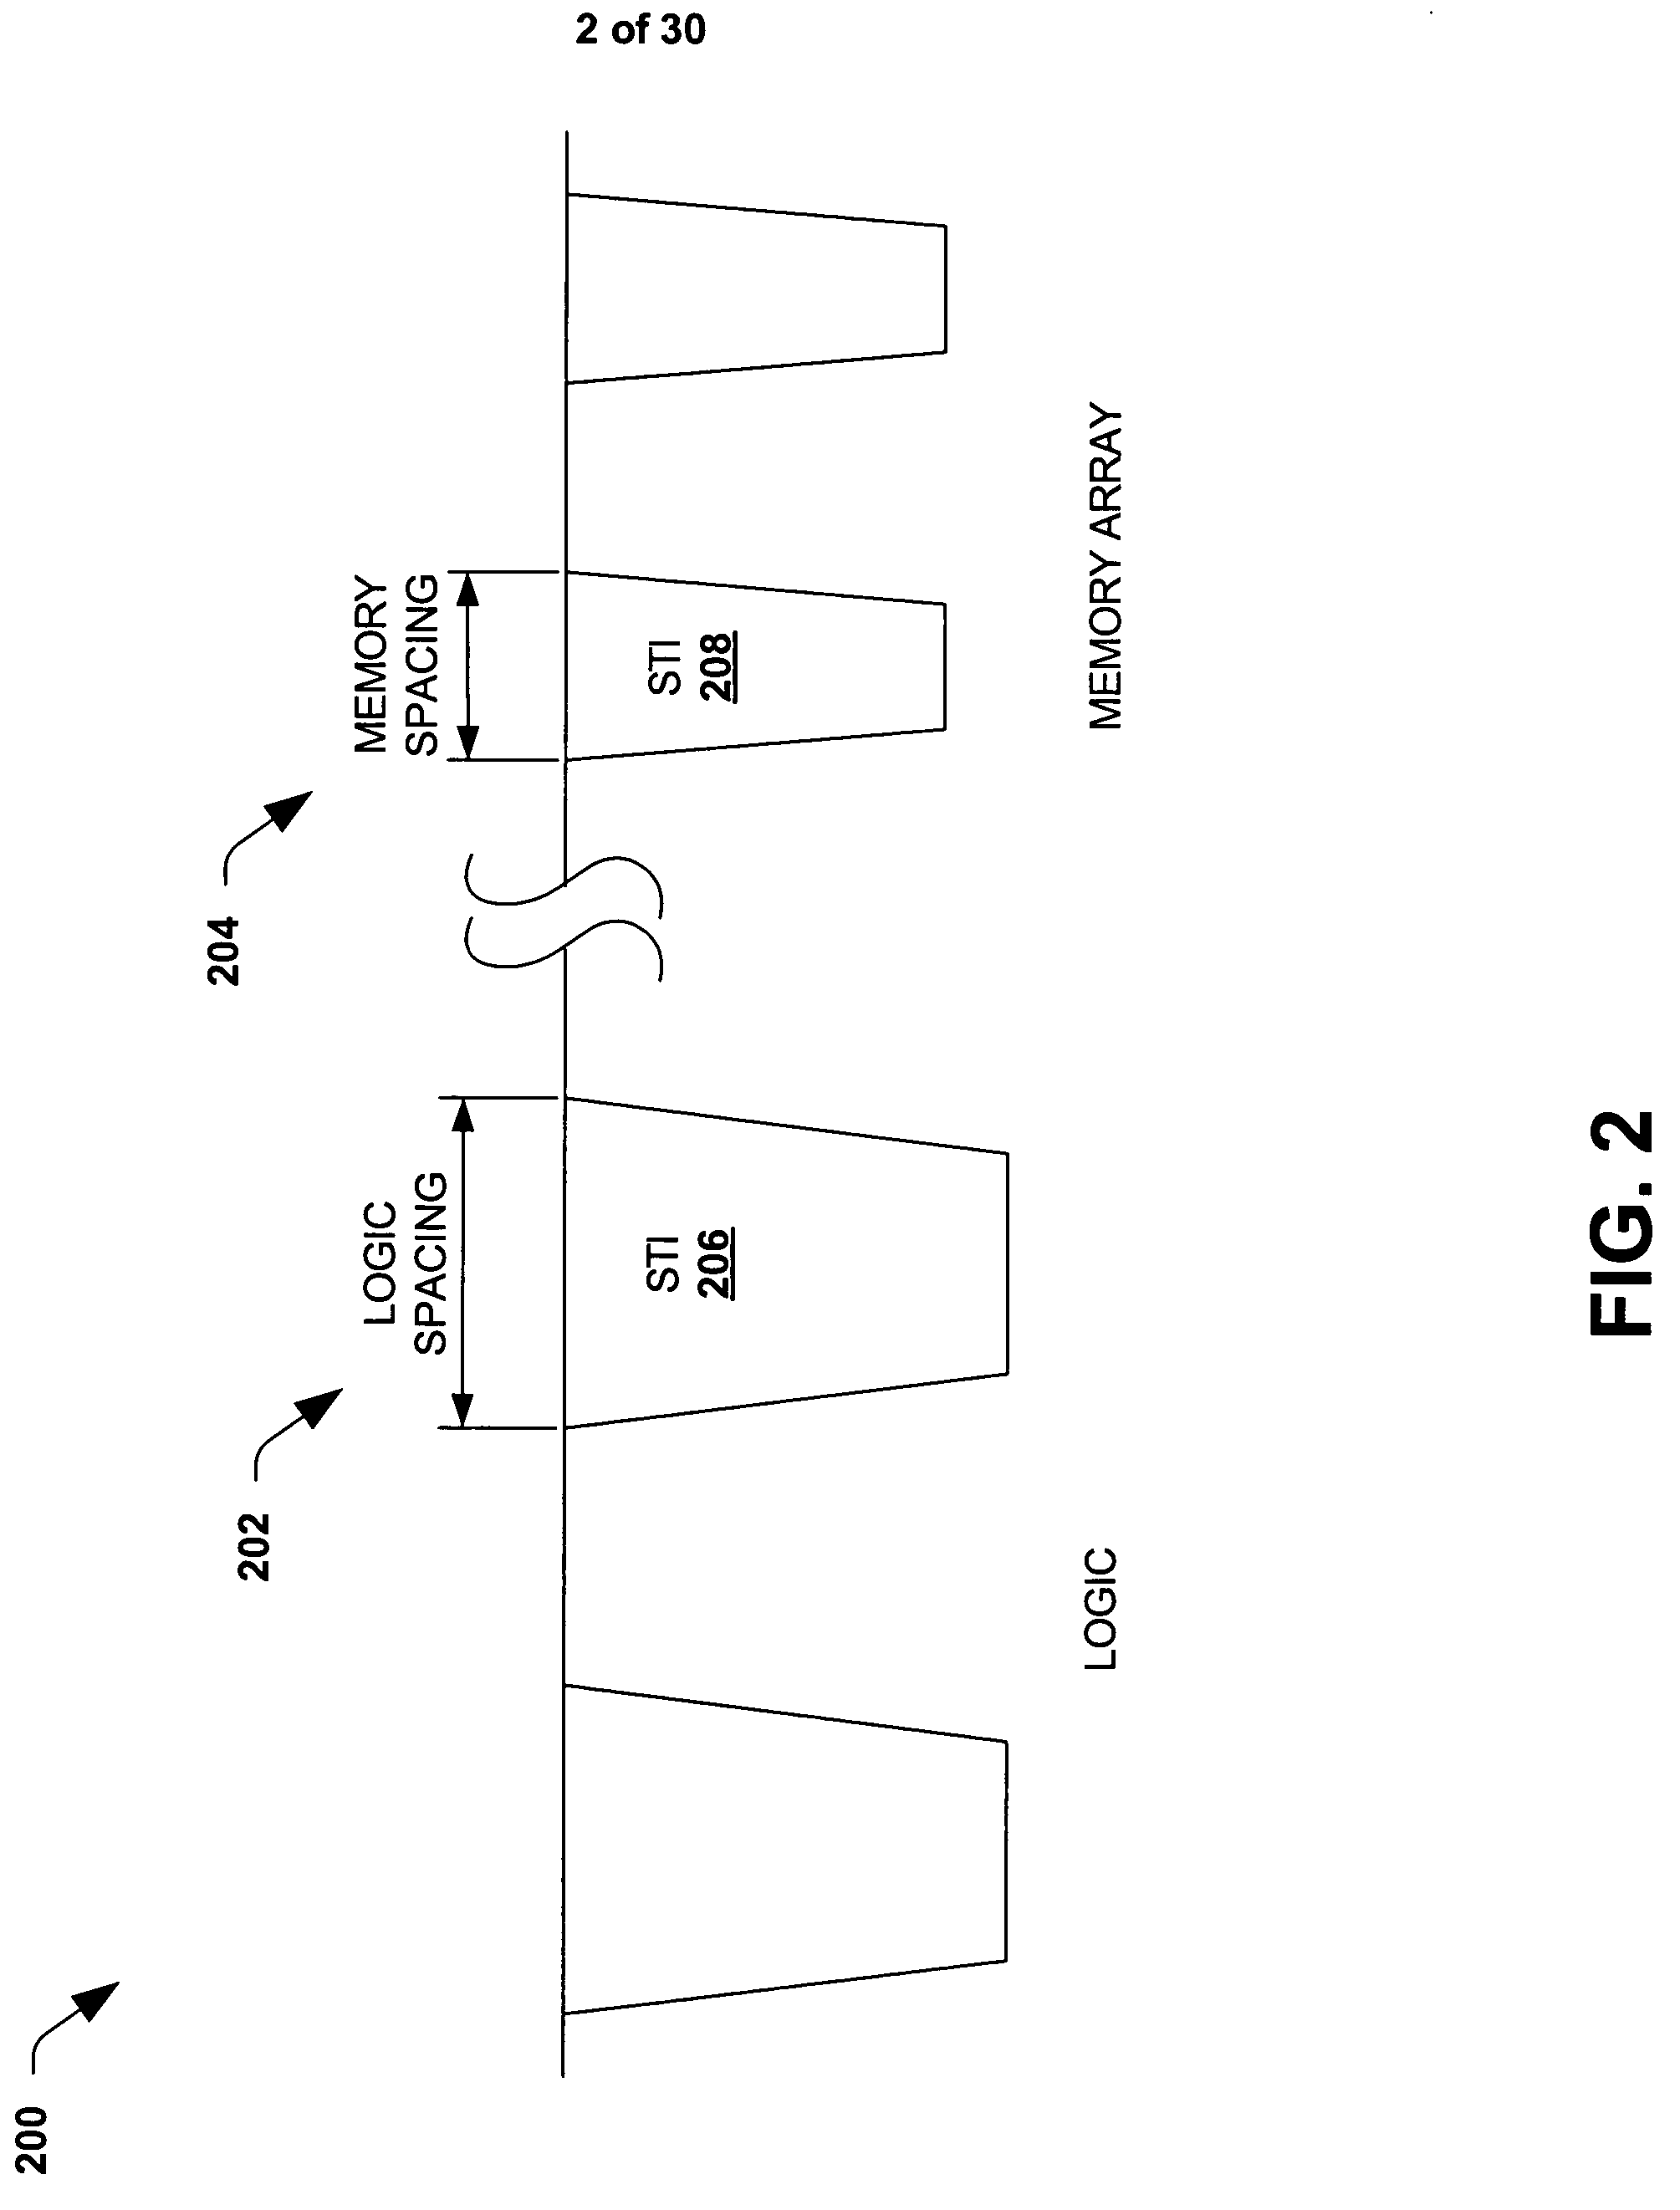 Application of different isolation schemes for logic and embedded memory